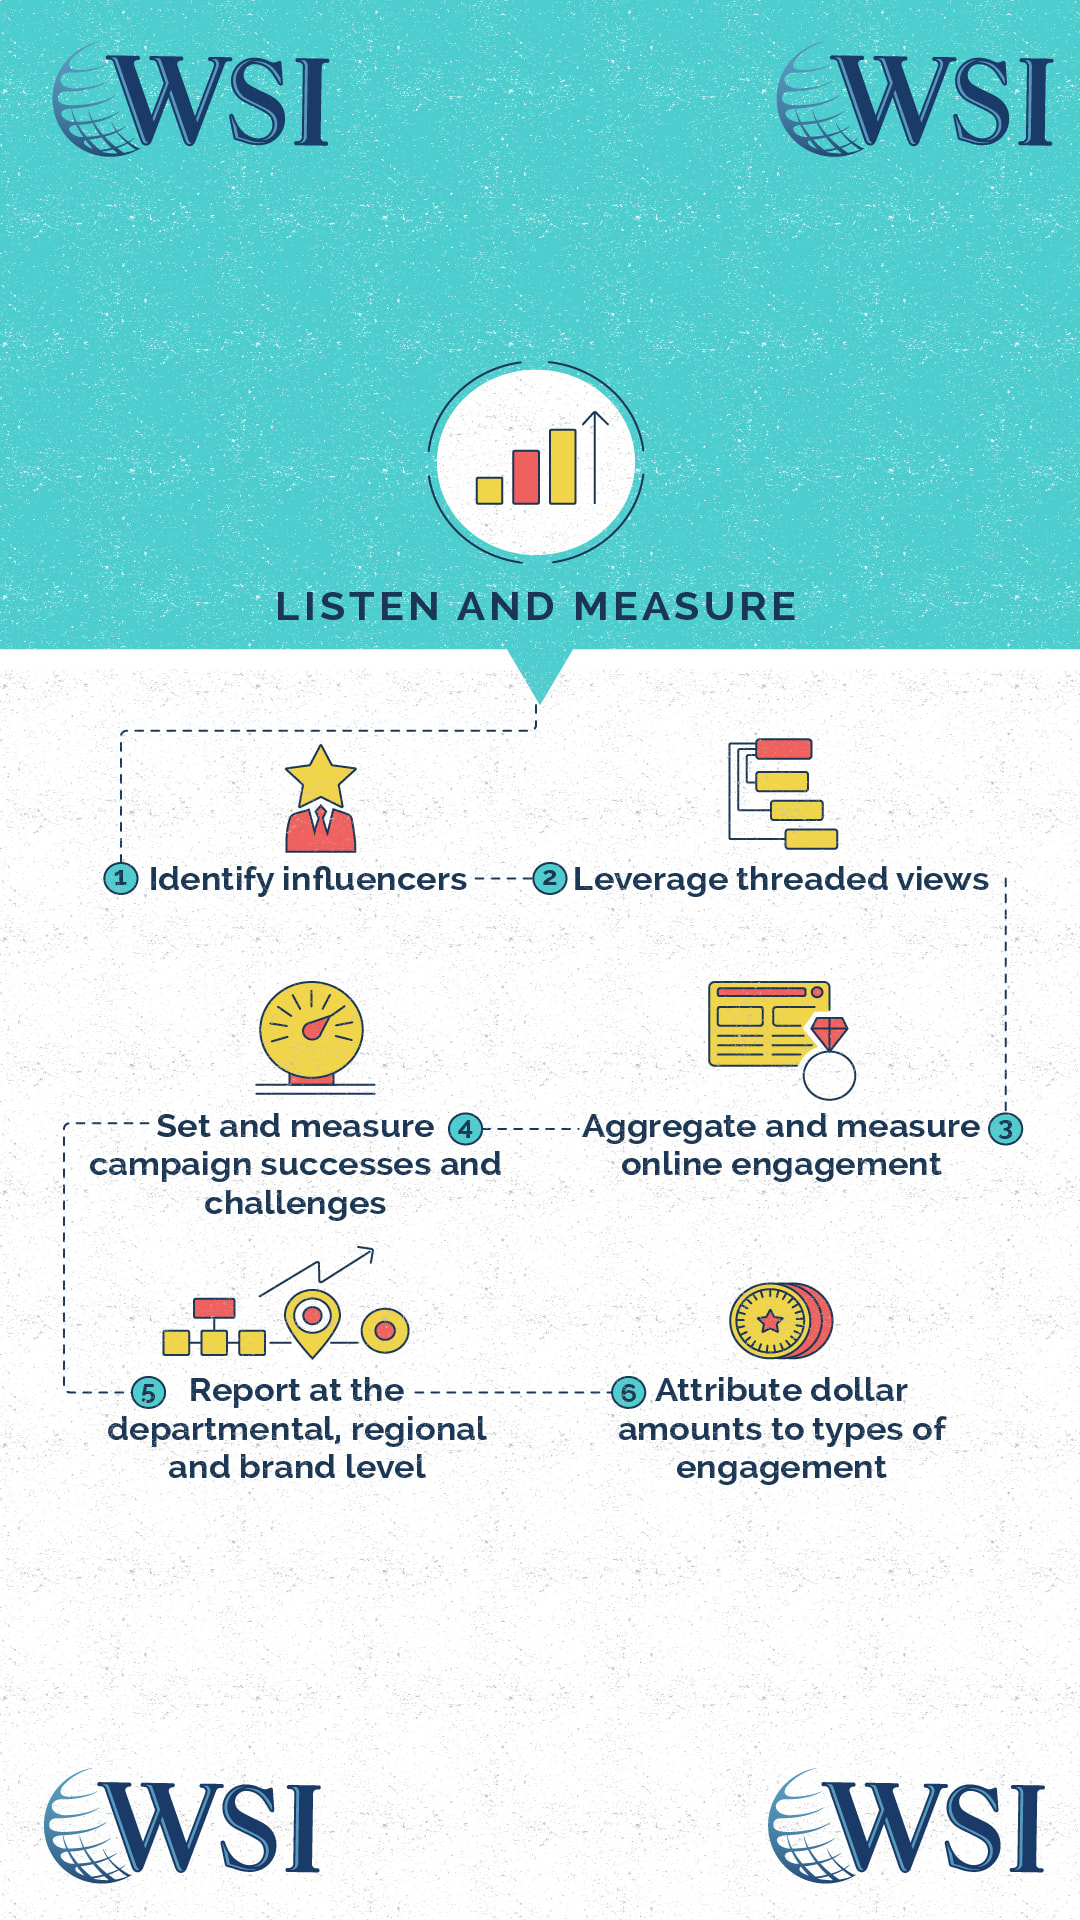 Marketing strategy for listening and measurement